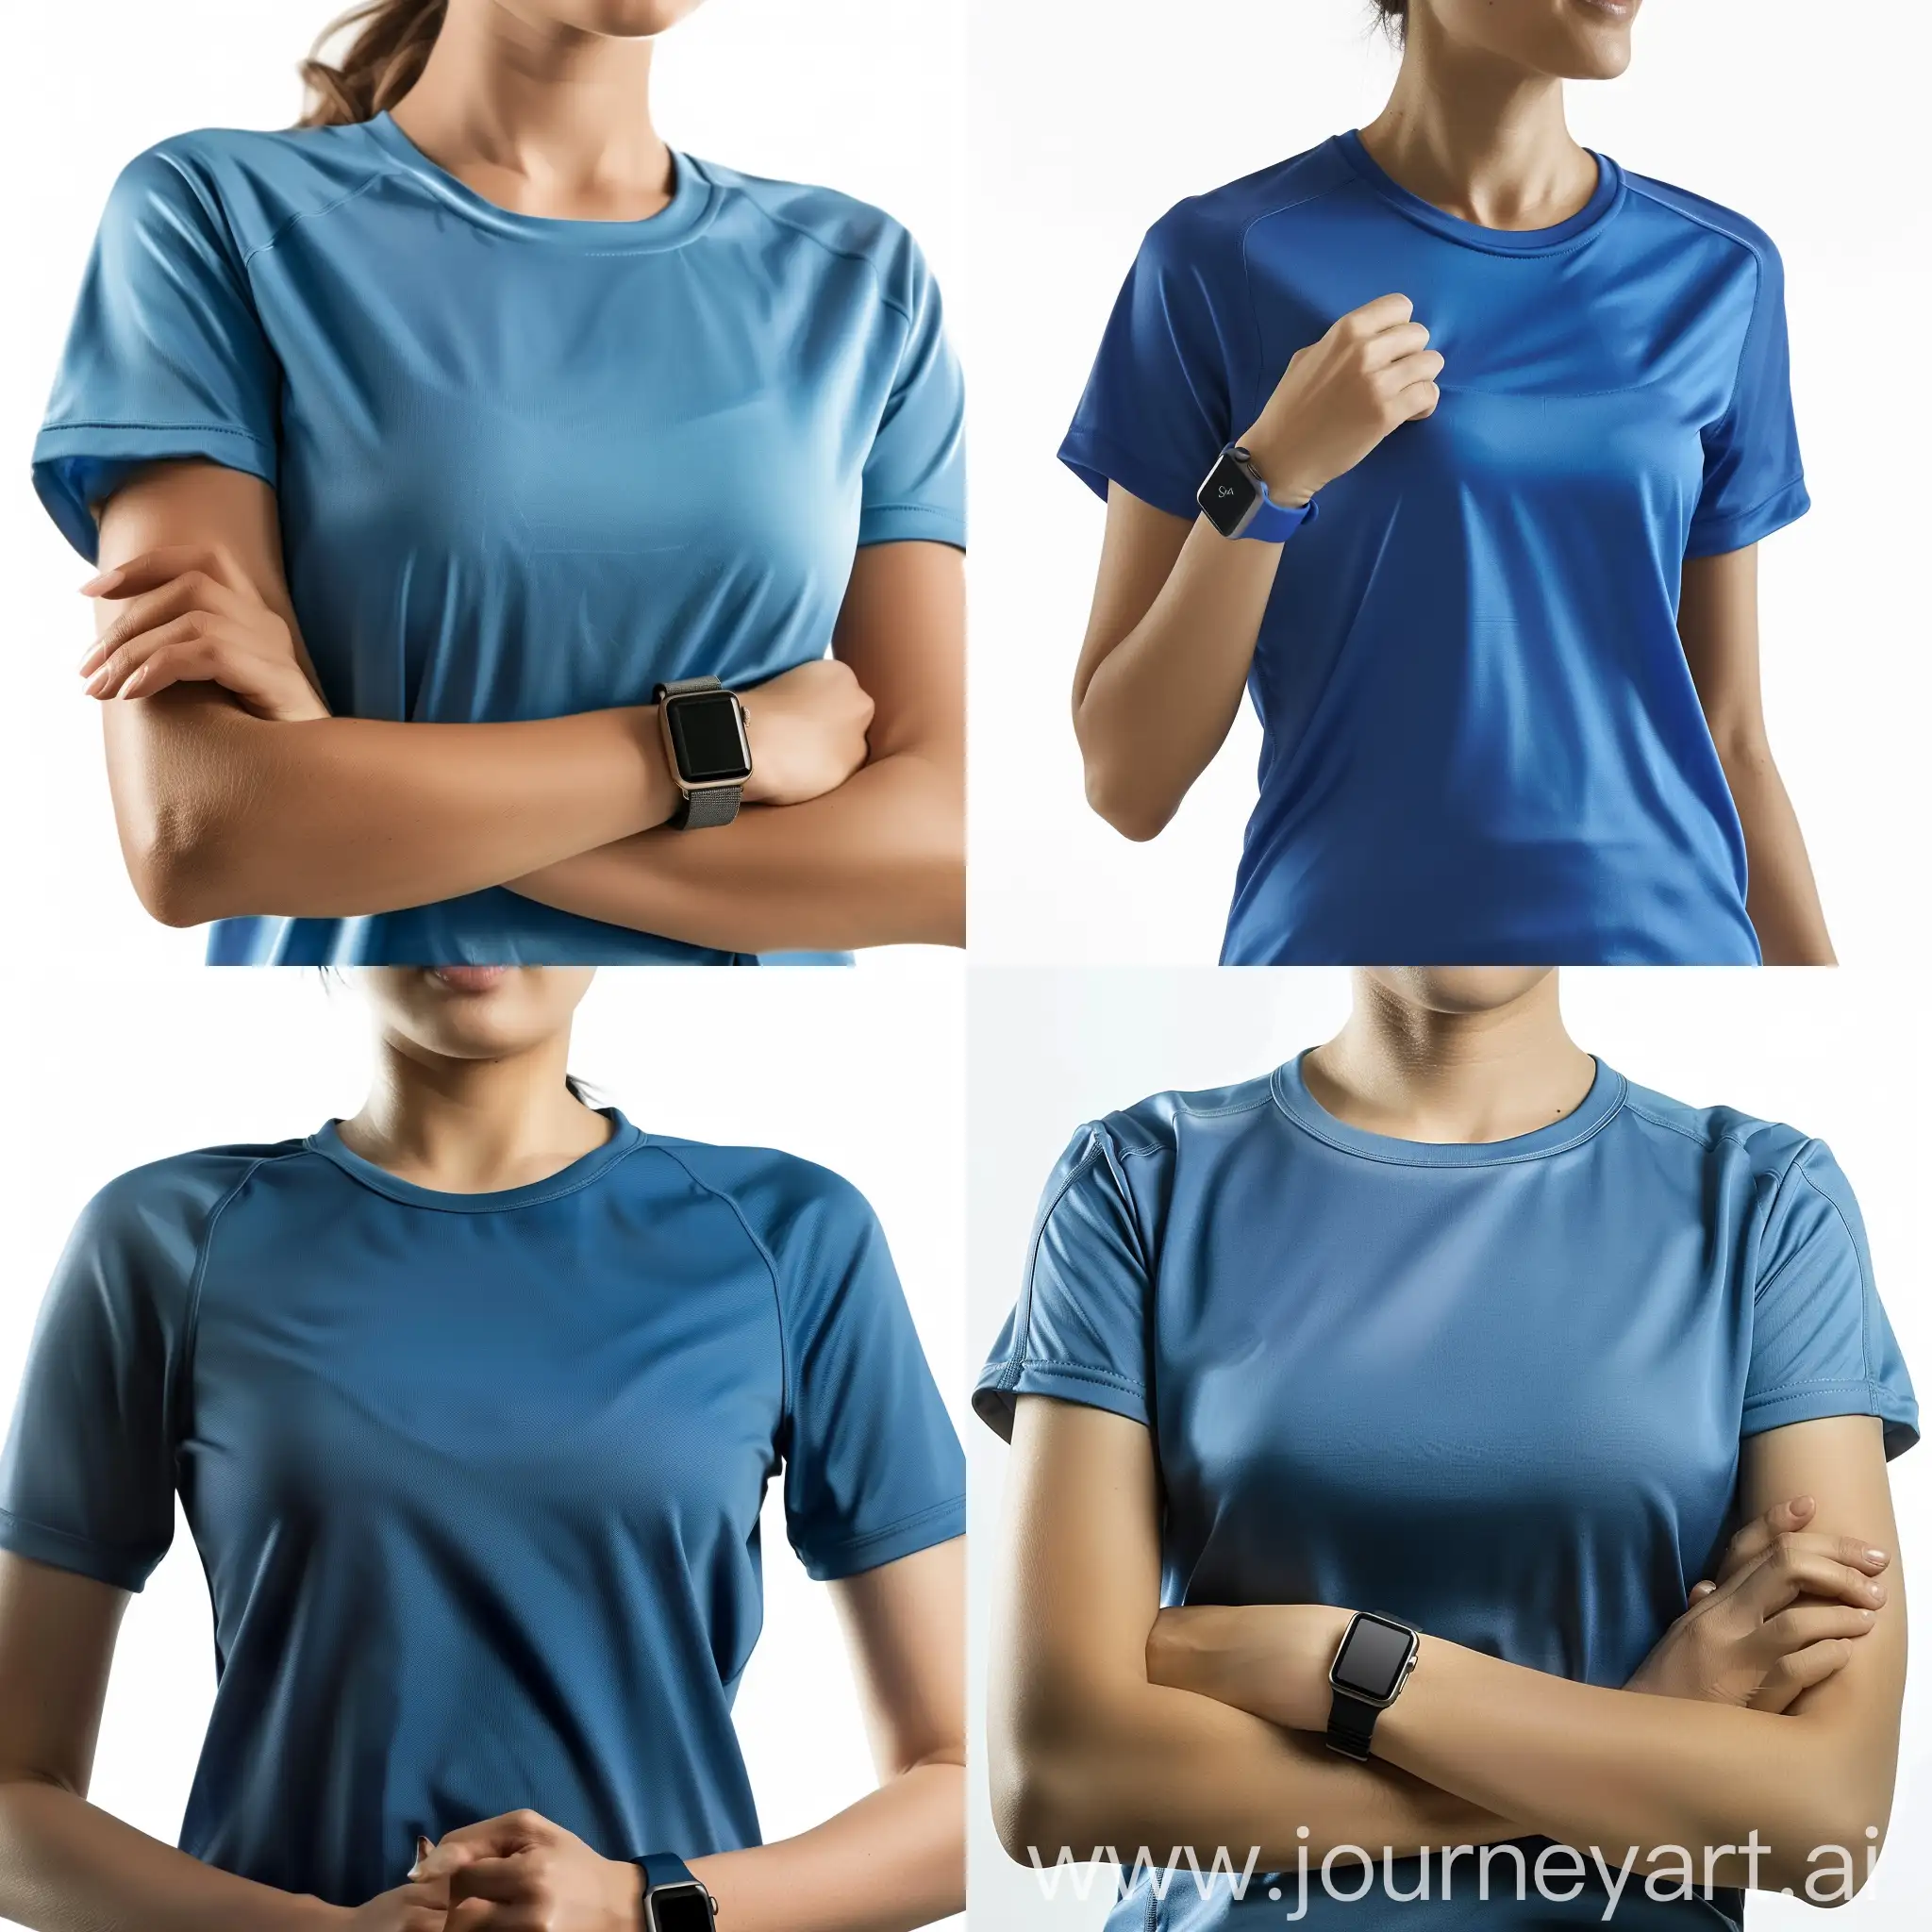 Sports lady wearing apple watch, very realistic, blue t-shirt, while exercising, white background